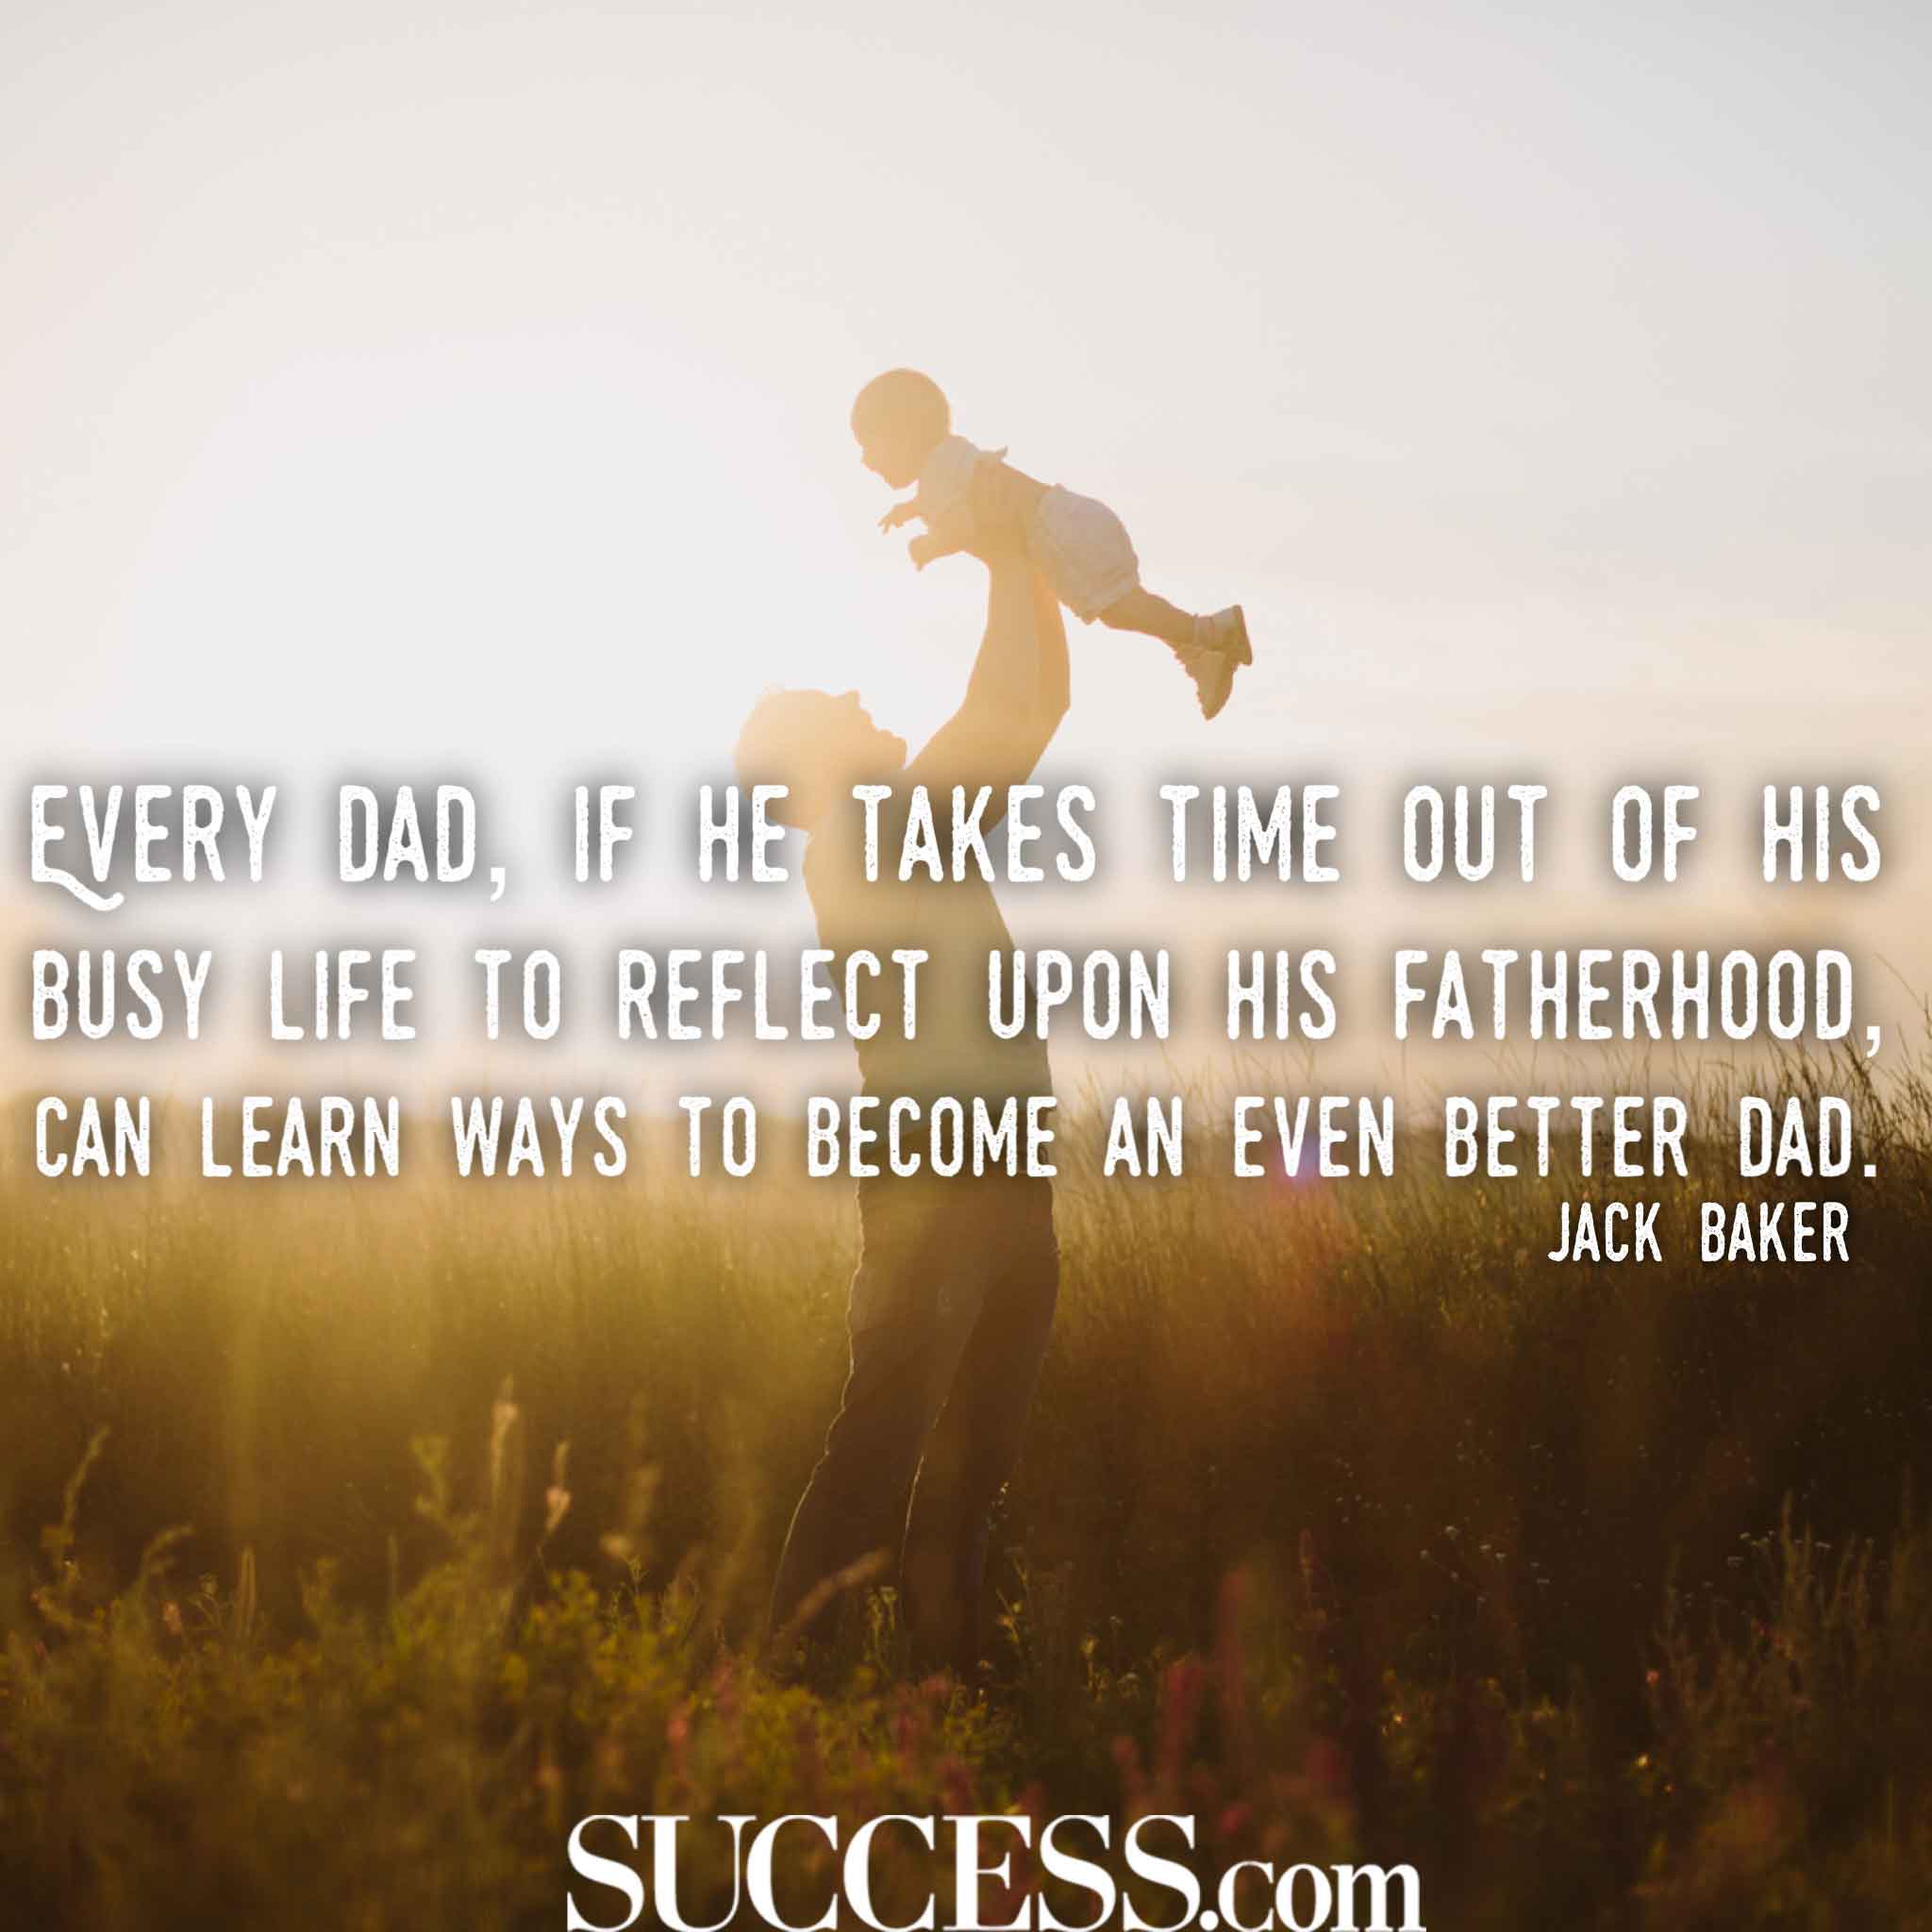 Quotes about being a dad